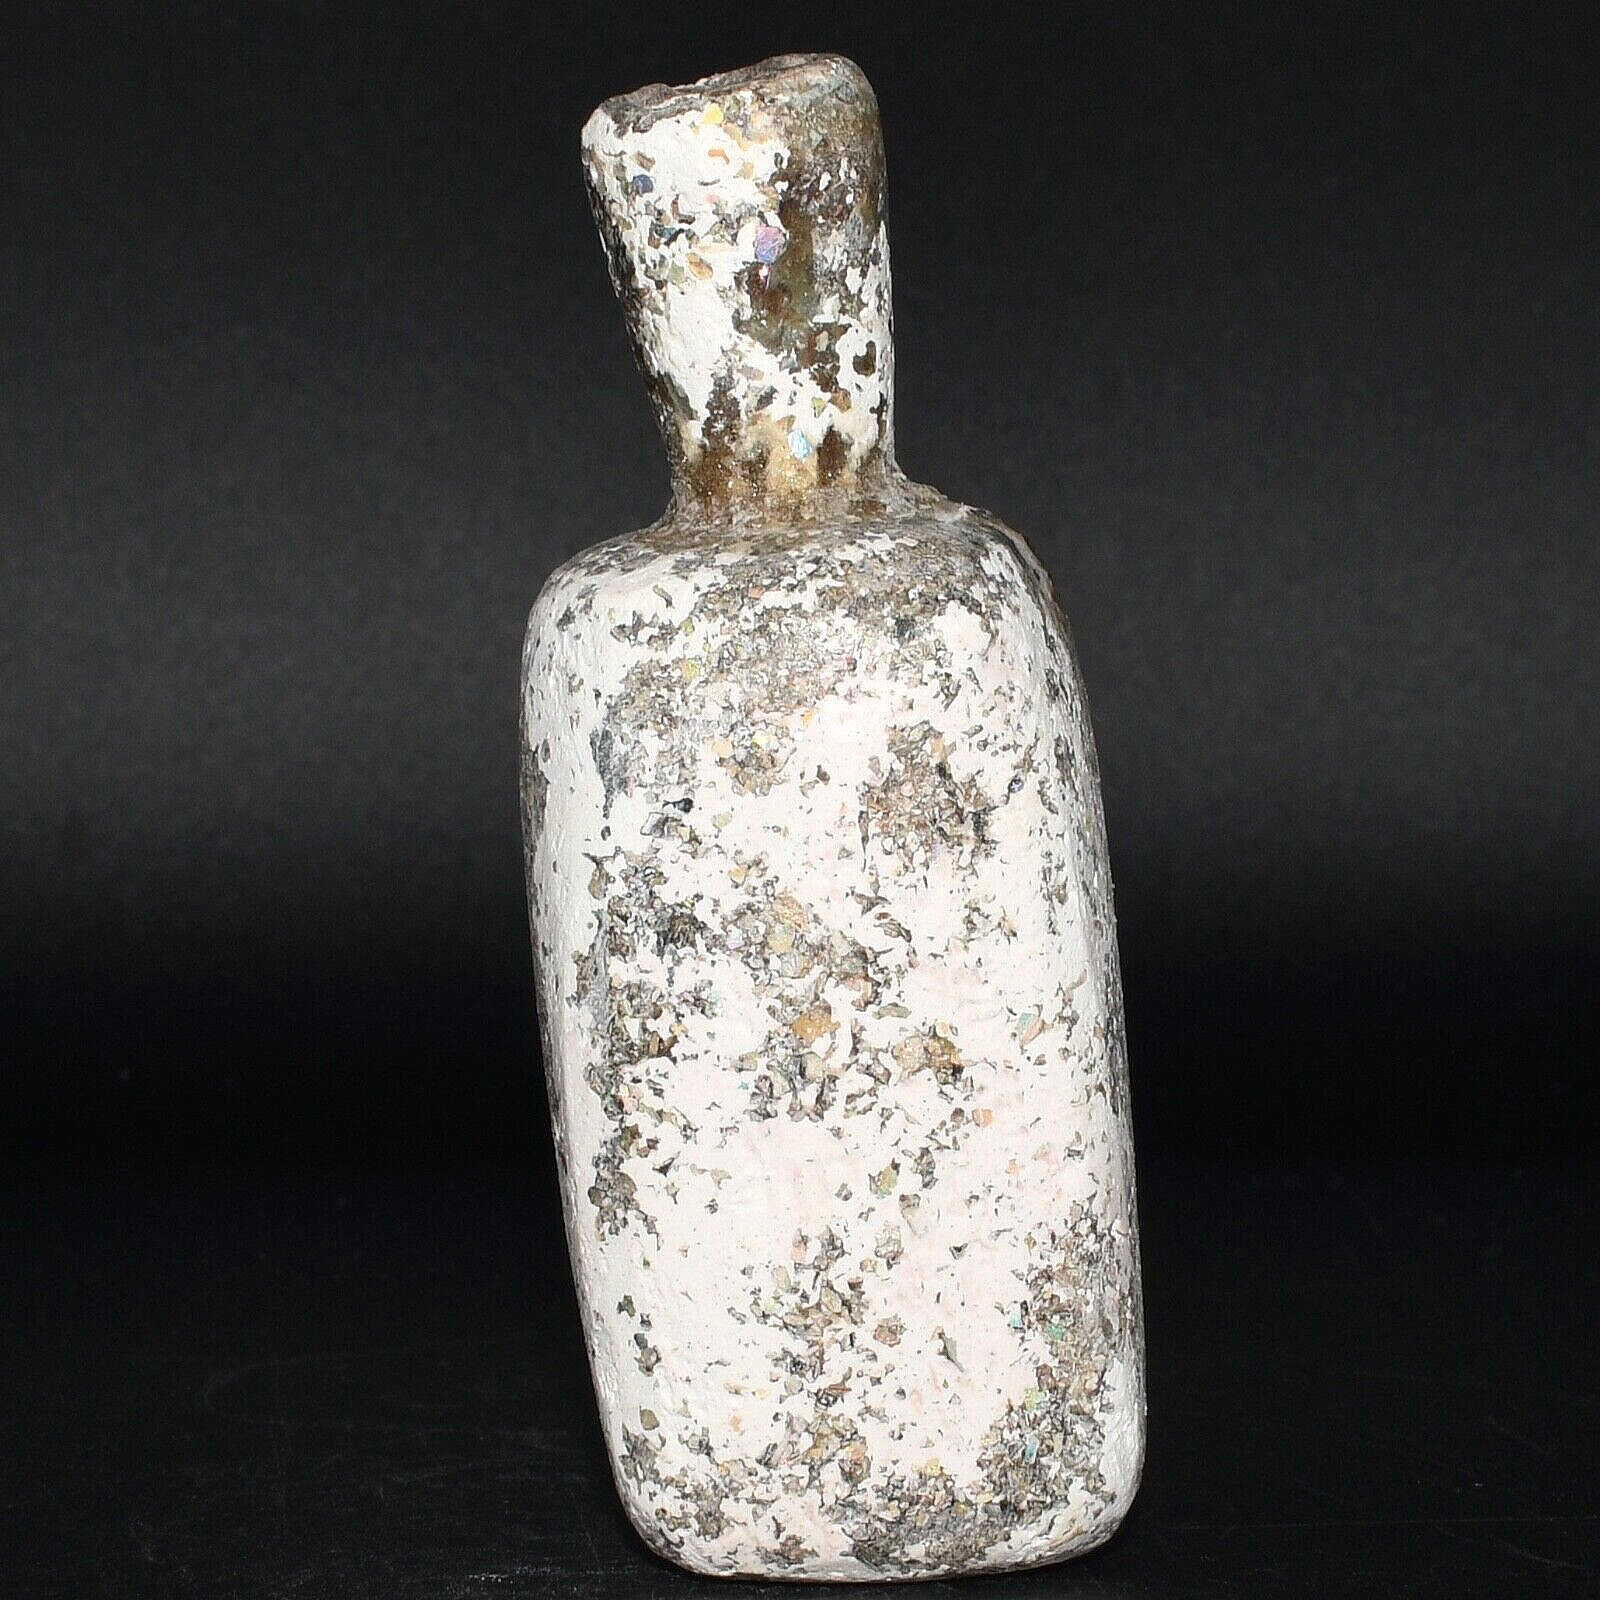 Genuine Ancient Roman Glass Bottle Vial with White Patina Circa 1st Century AD